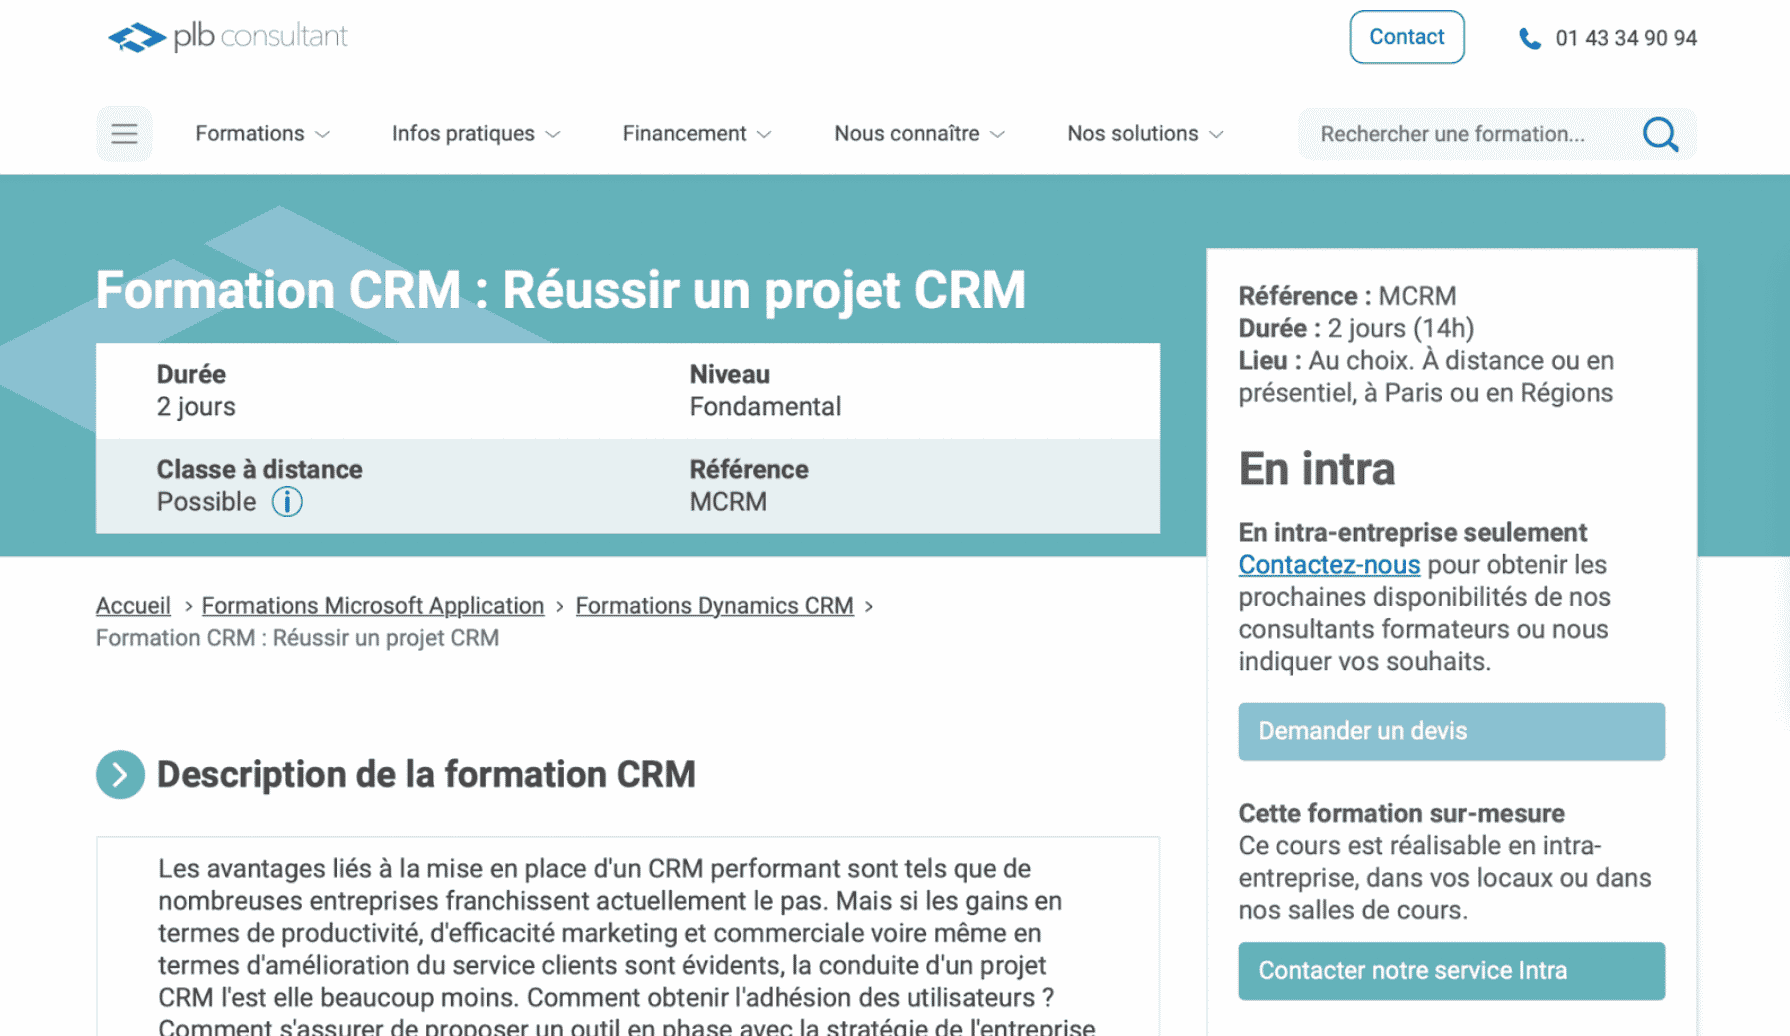 formations crm exemple 7